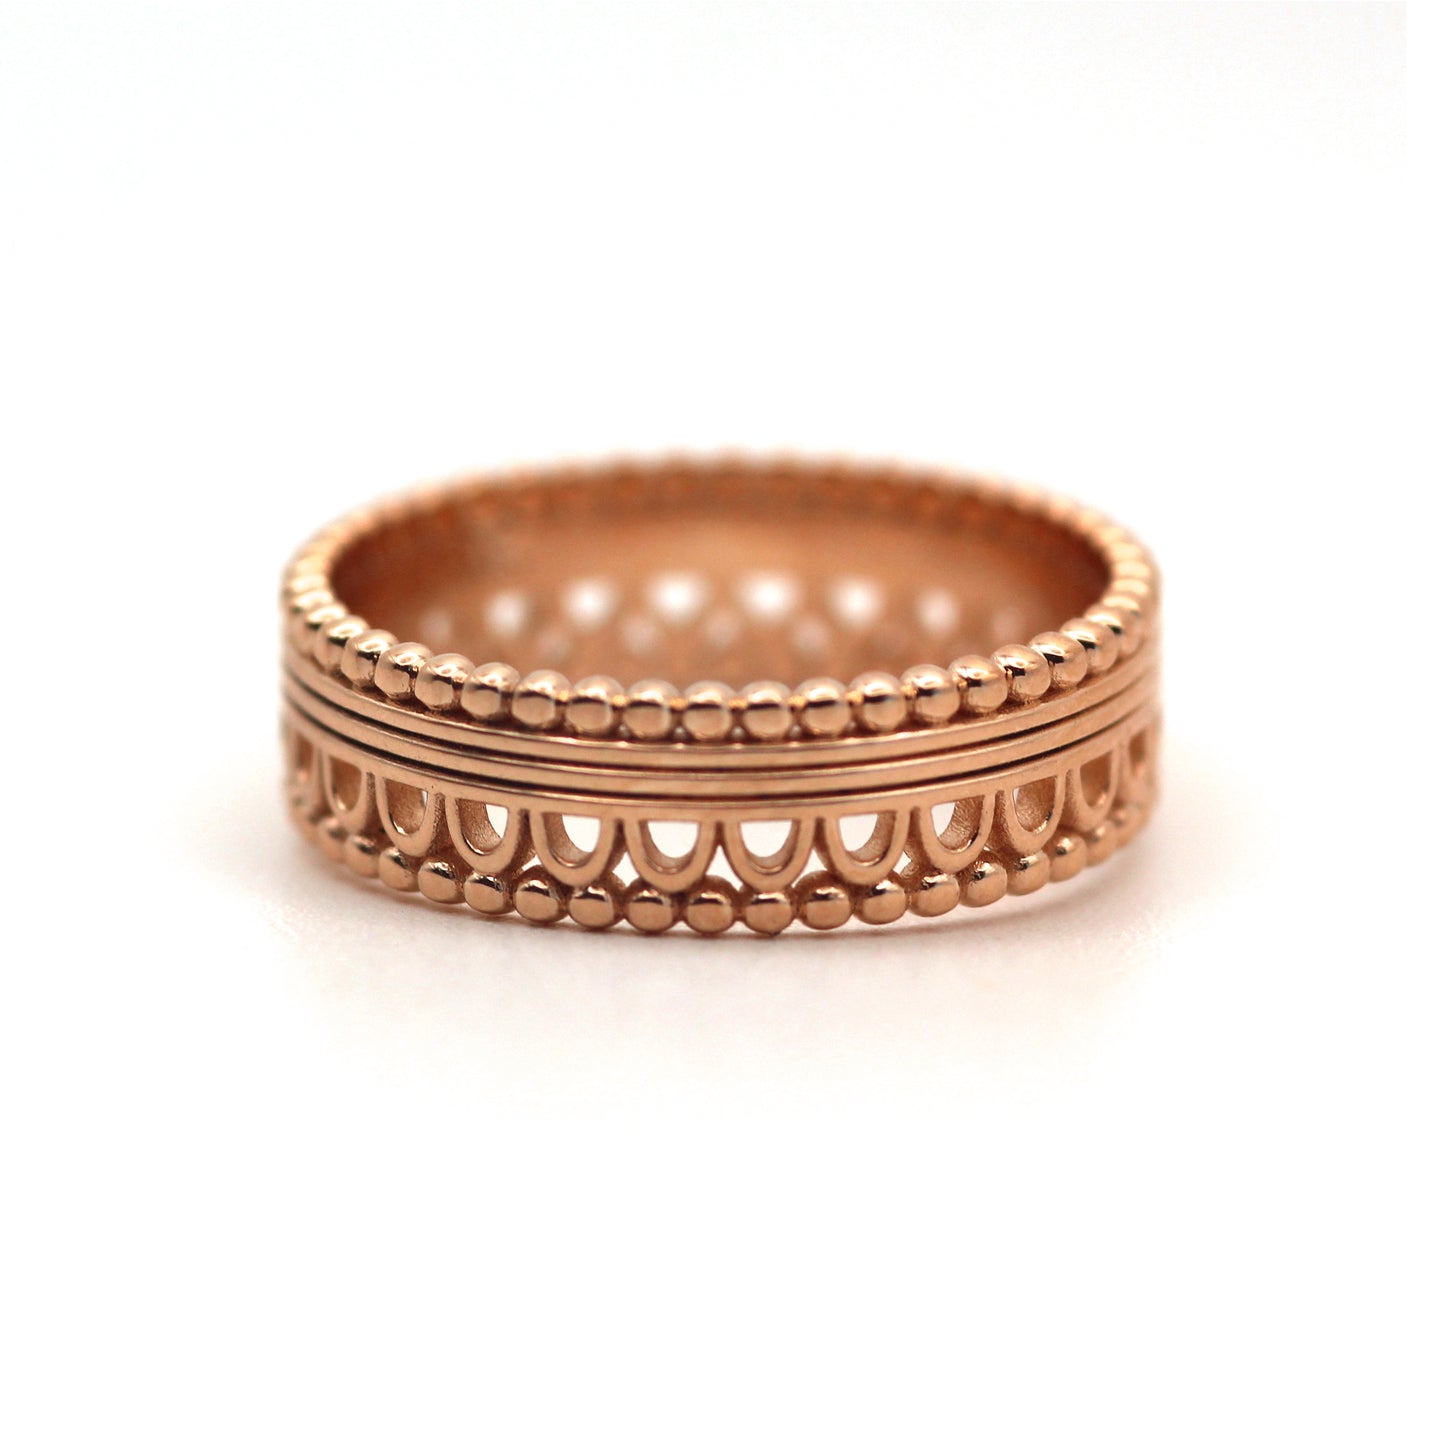 18k Antique Lace Pattern Gold Ring